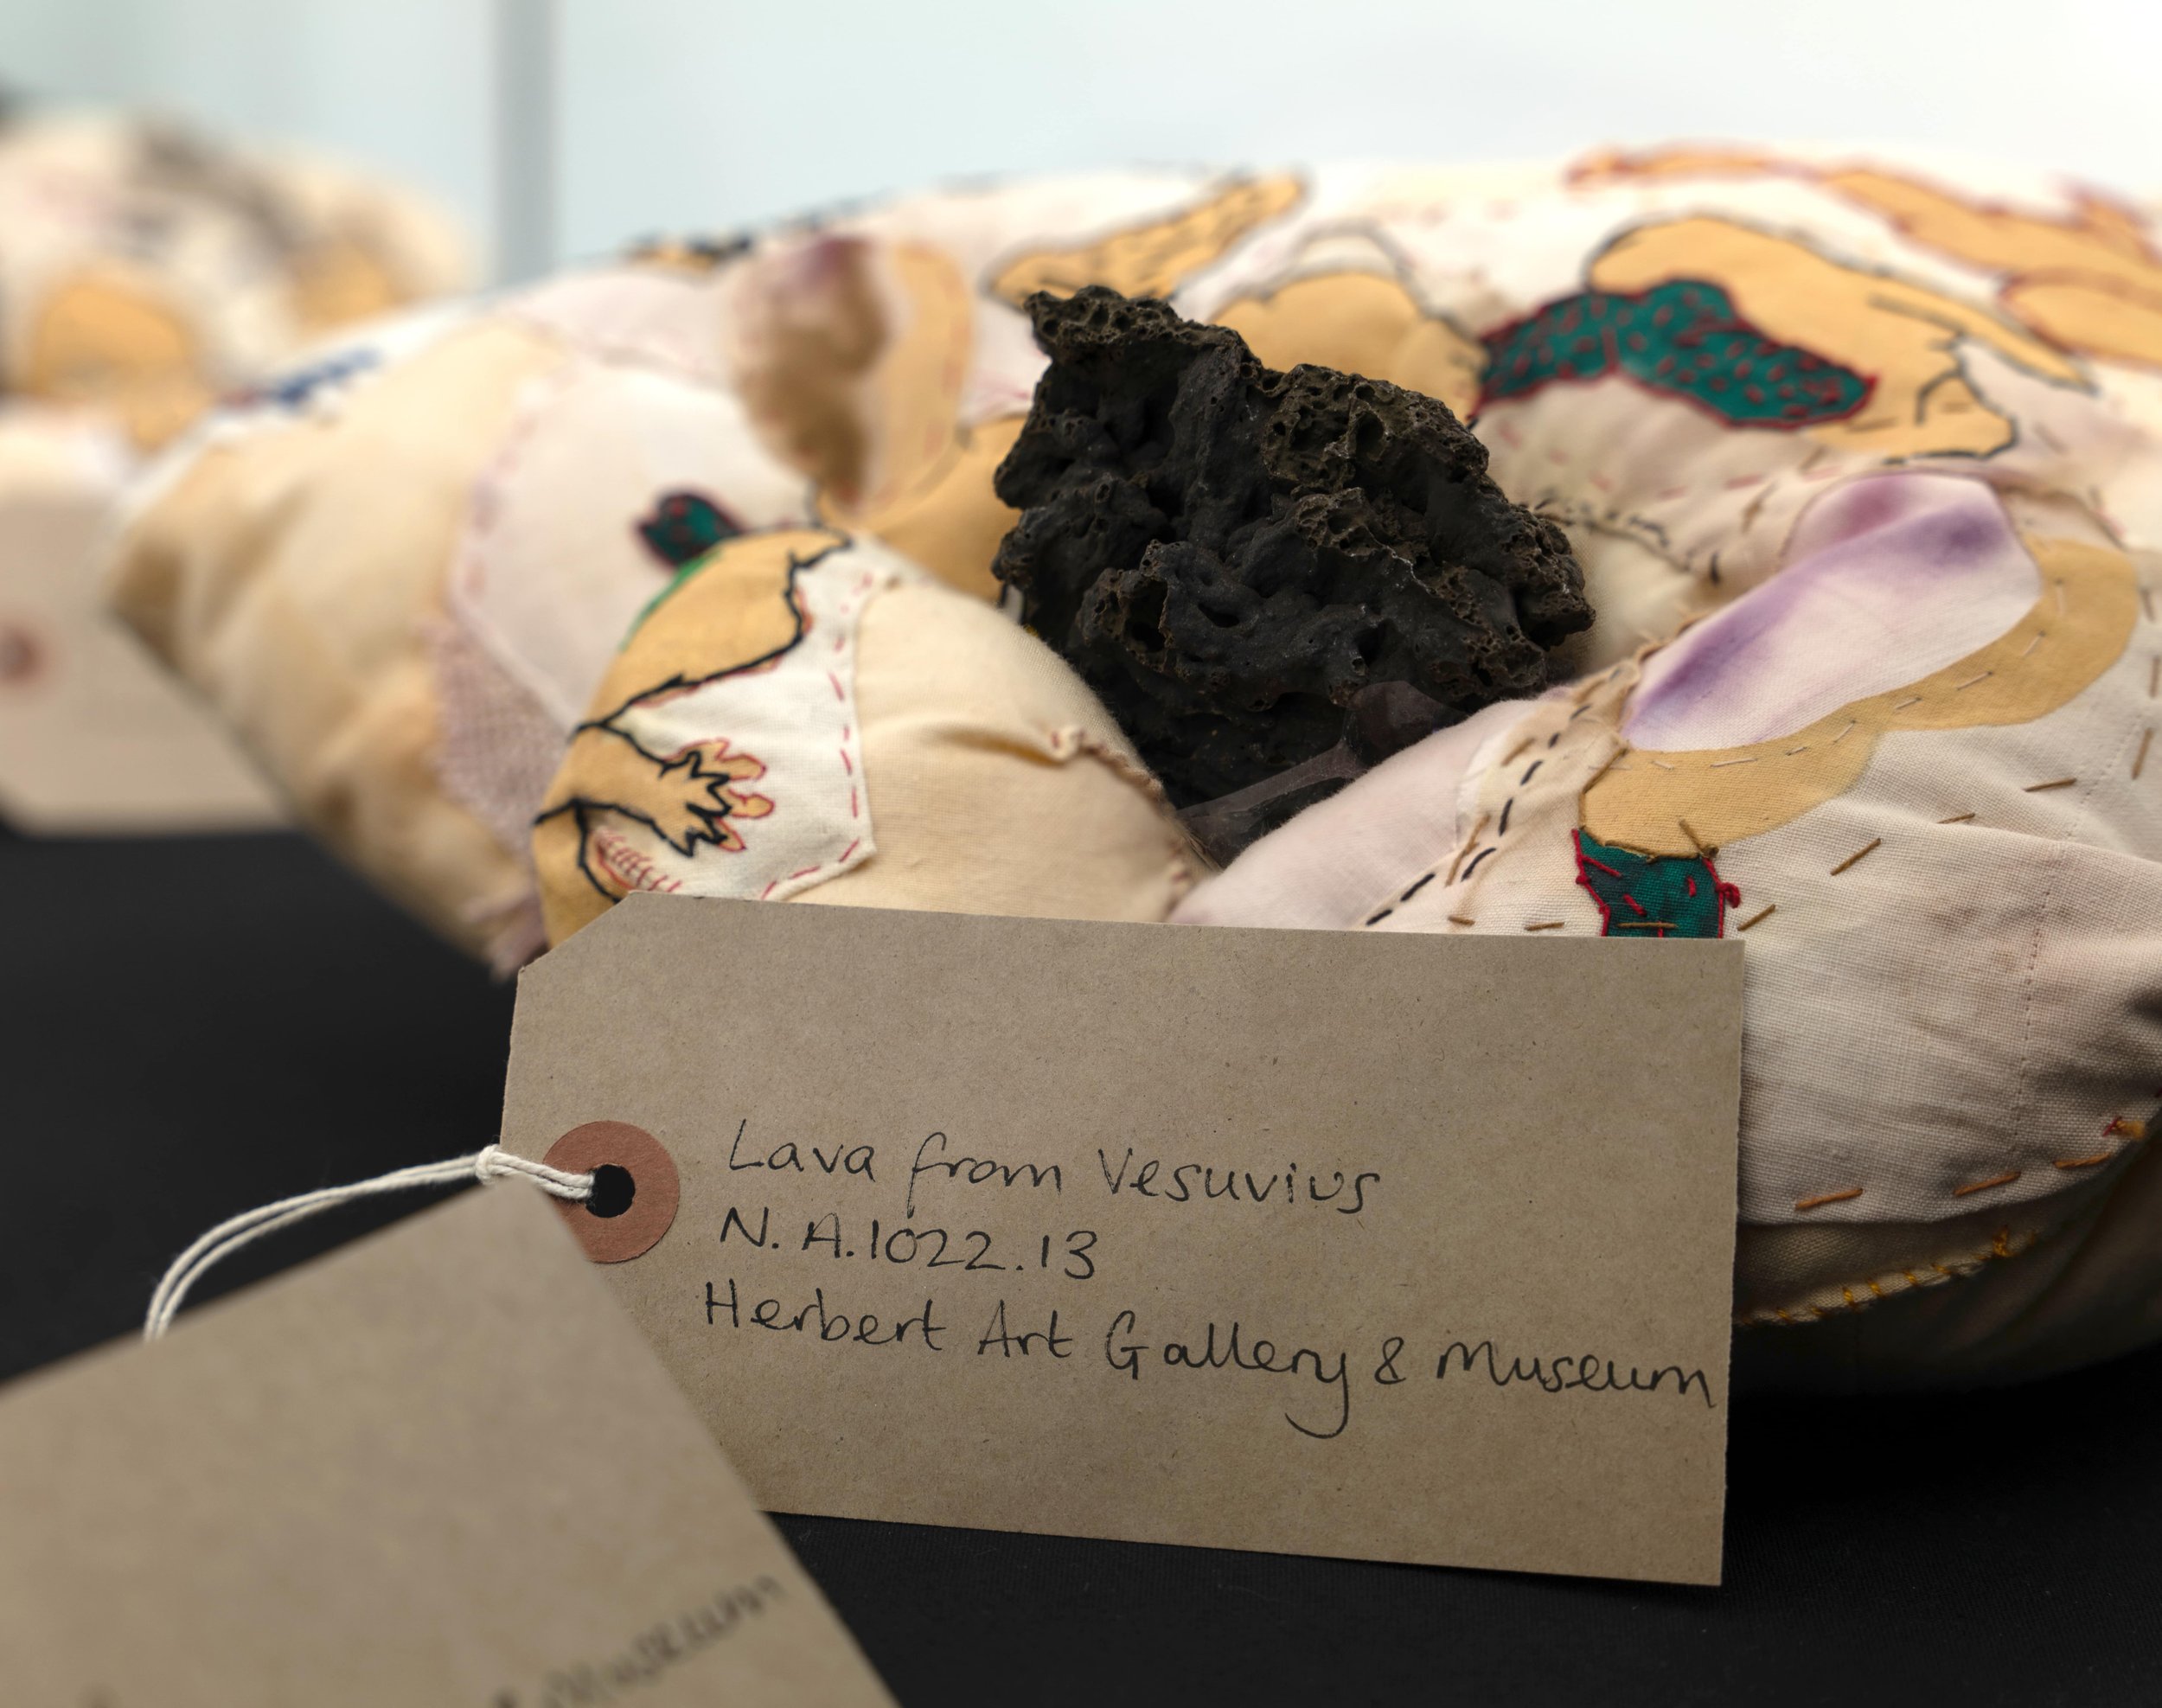  The Mouth of The Ground, 2021. Textile painting and embroidery on naturally dyed fabrics; patchwork on Fiber-filled fabric.   Courtesy by Invisible Dust, 2021. Photo credit by Jaron James and Garry Jones. The Mouth of the Ground was commissioned and